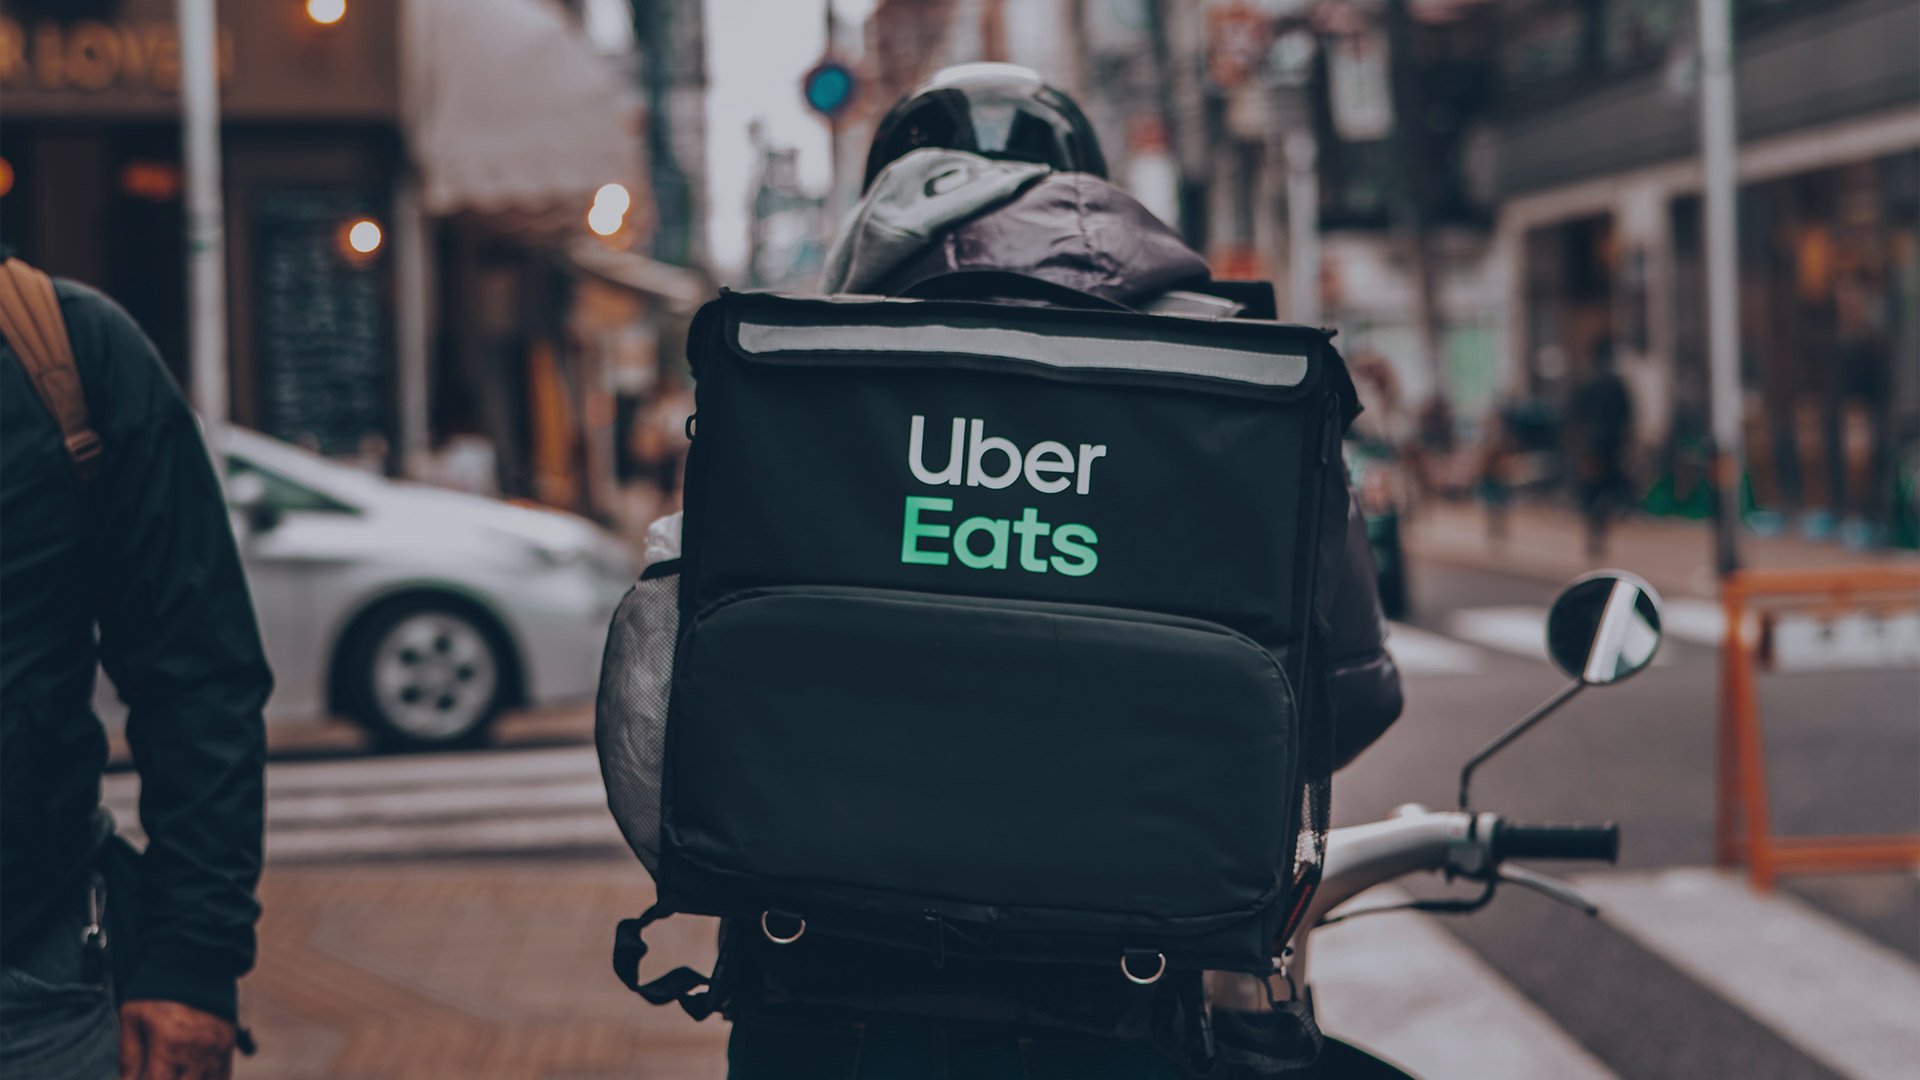 Best Food Delivery Apps to Work For